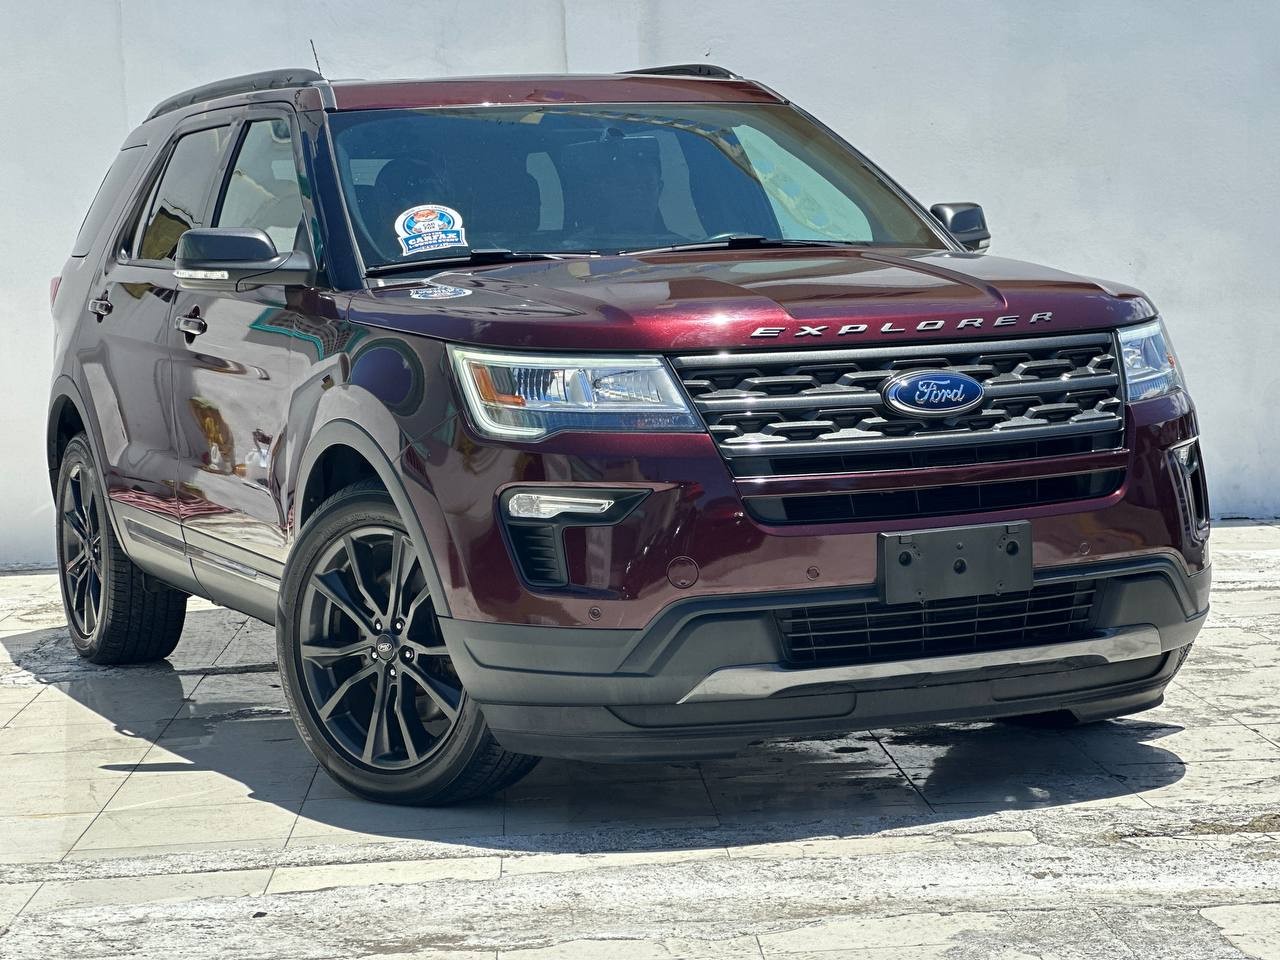 jeepetas y camionetas - FORD EXPLORER PANORAMICA 4x4 2018CLEAN CARFAX